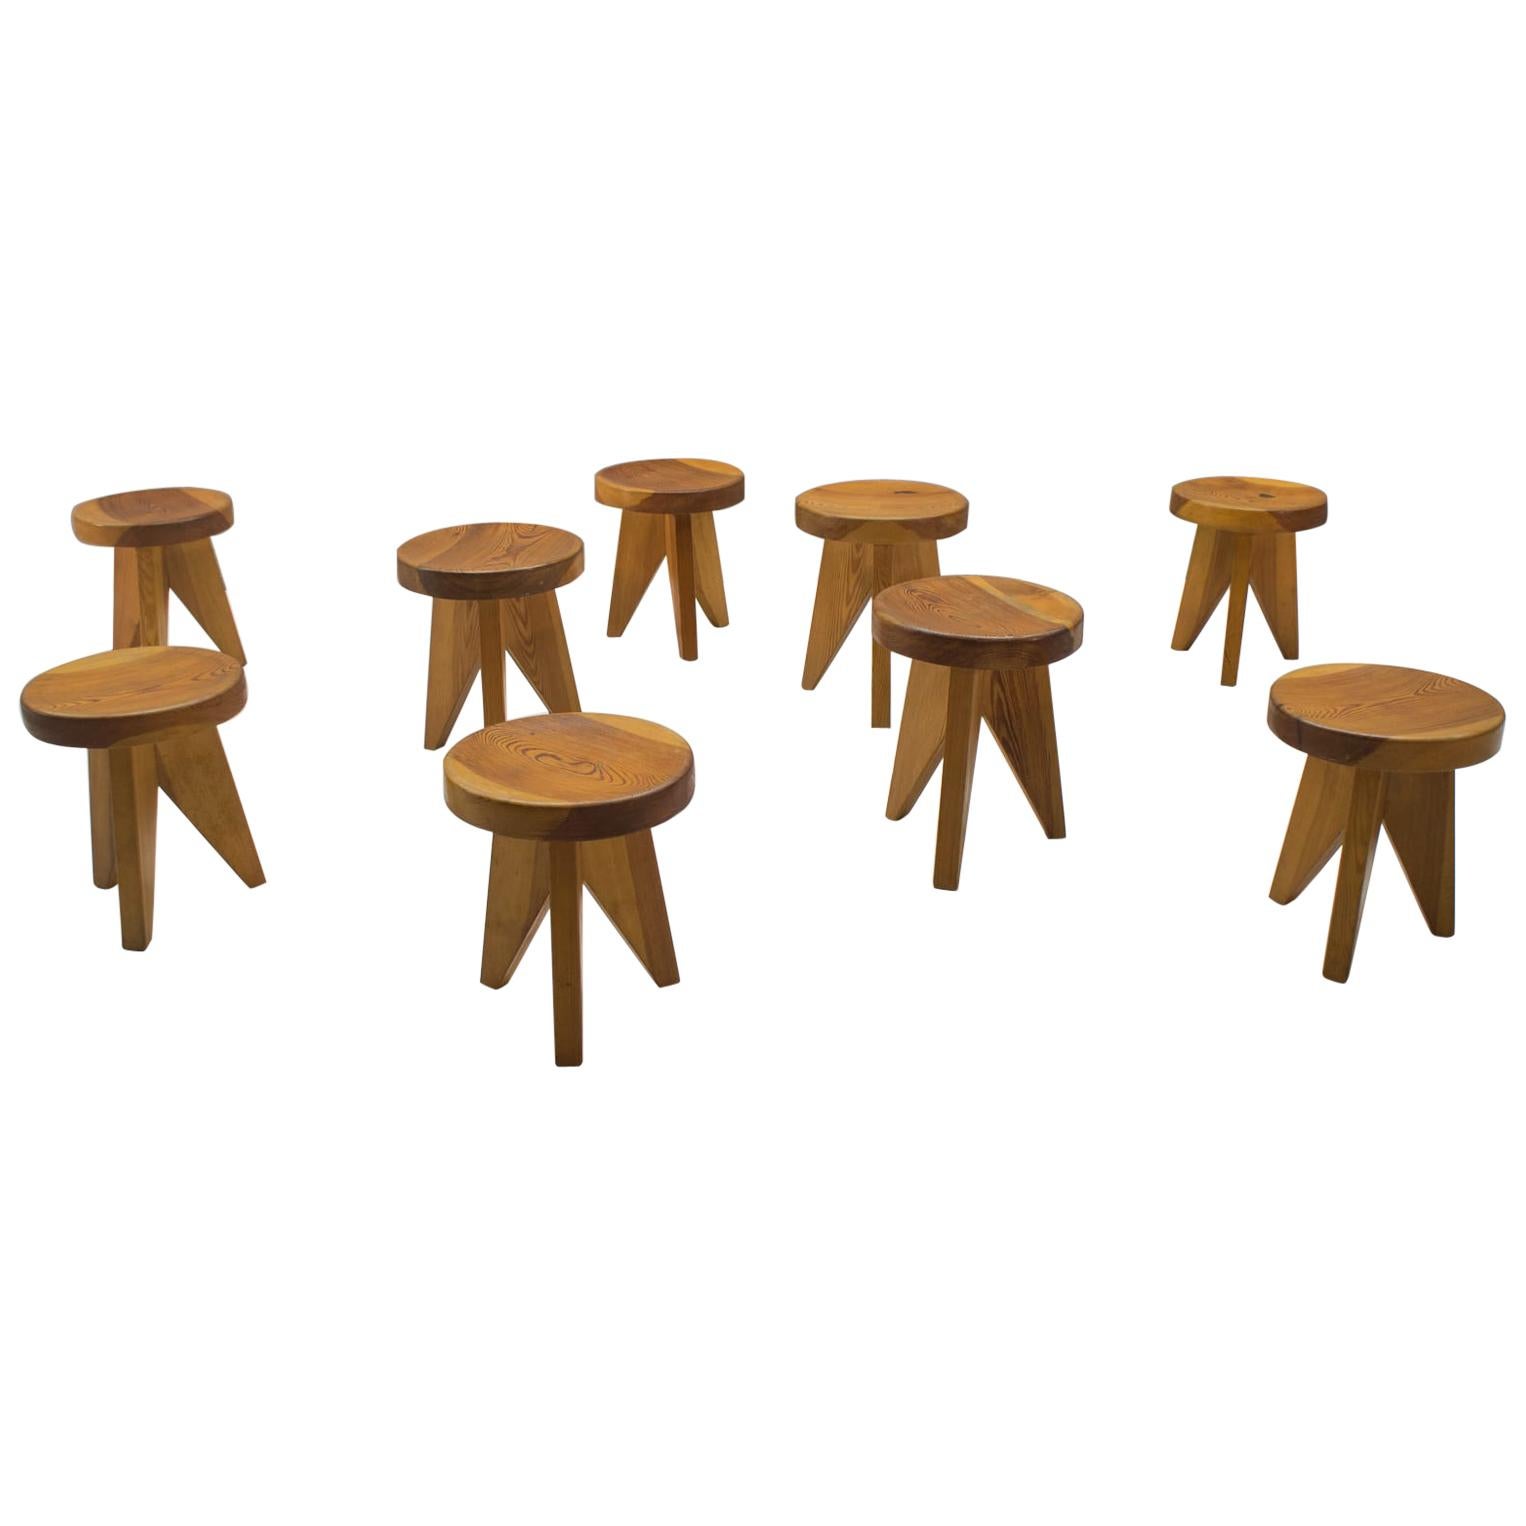 Three-Legged Wooden Stools in Manner of Pierre Chapo, France, 1960s